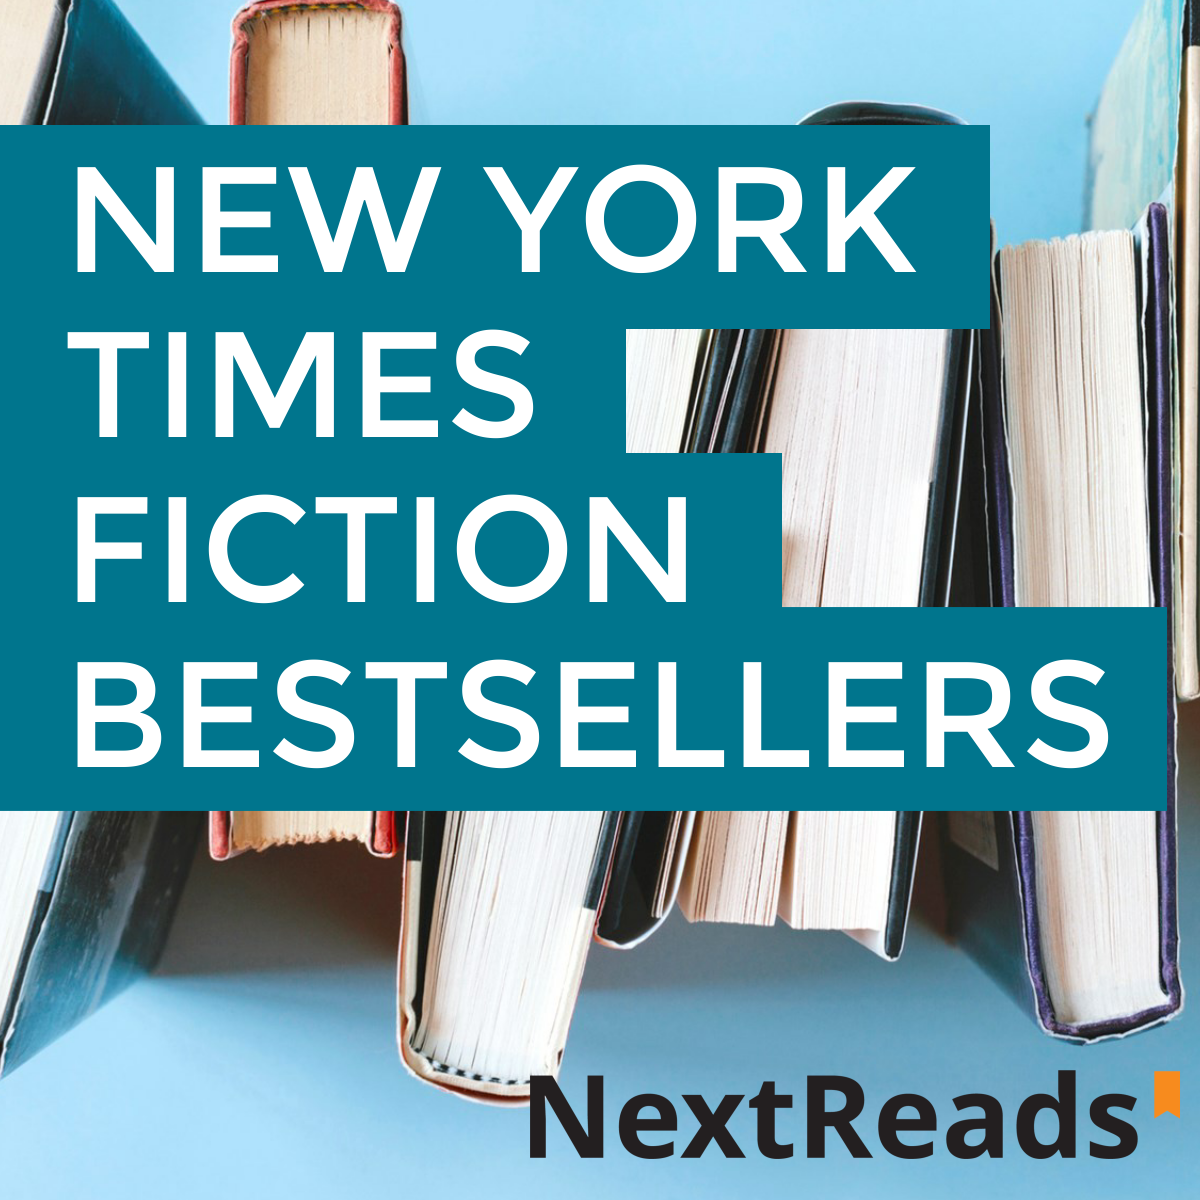 New York Times Fiction Bestsellers